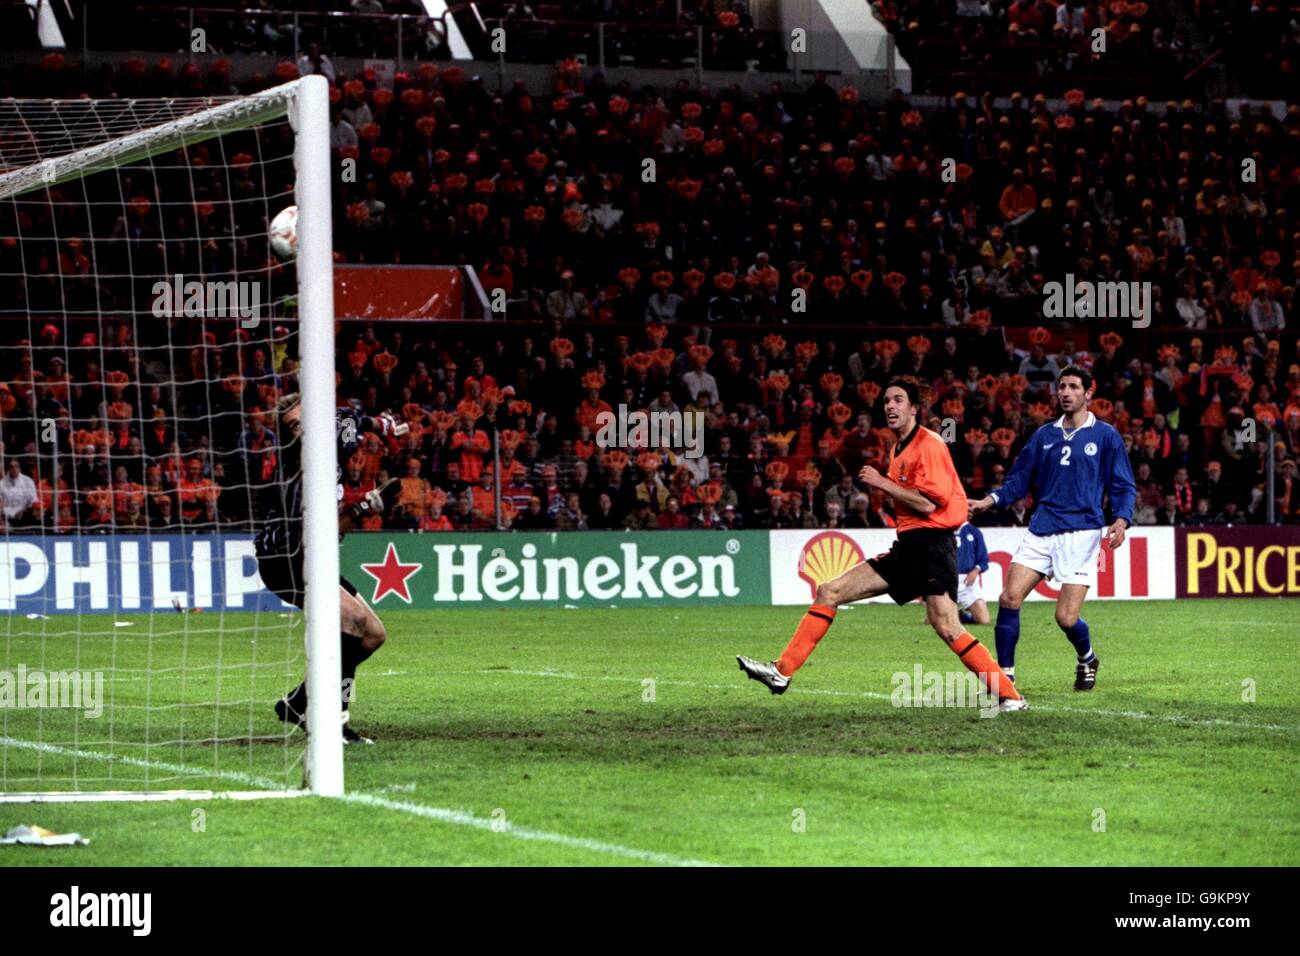 Holland's Ruud van Nistelrooy scores Holland's fourth goal against Cyprus after being left unmarked by Petros Konnafis as goalkeeper Michael Morphis looks on. Stock Photo